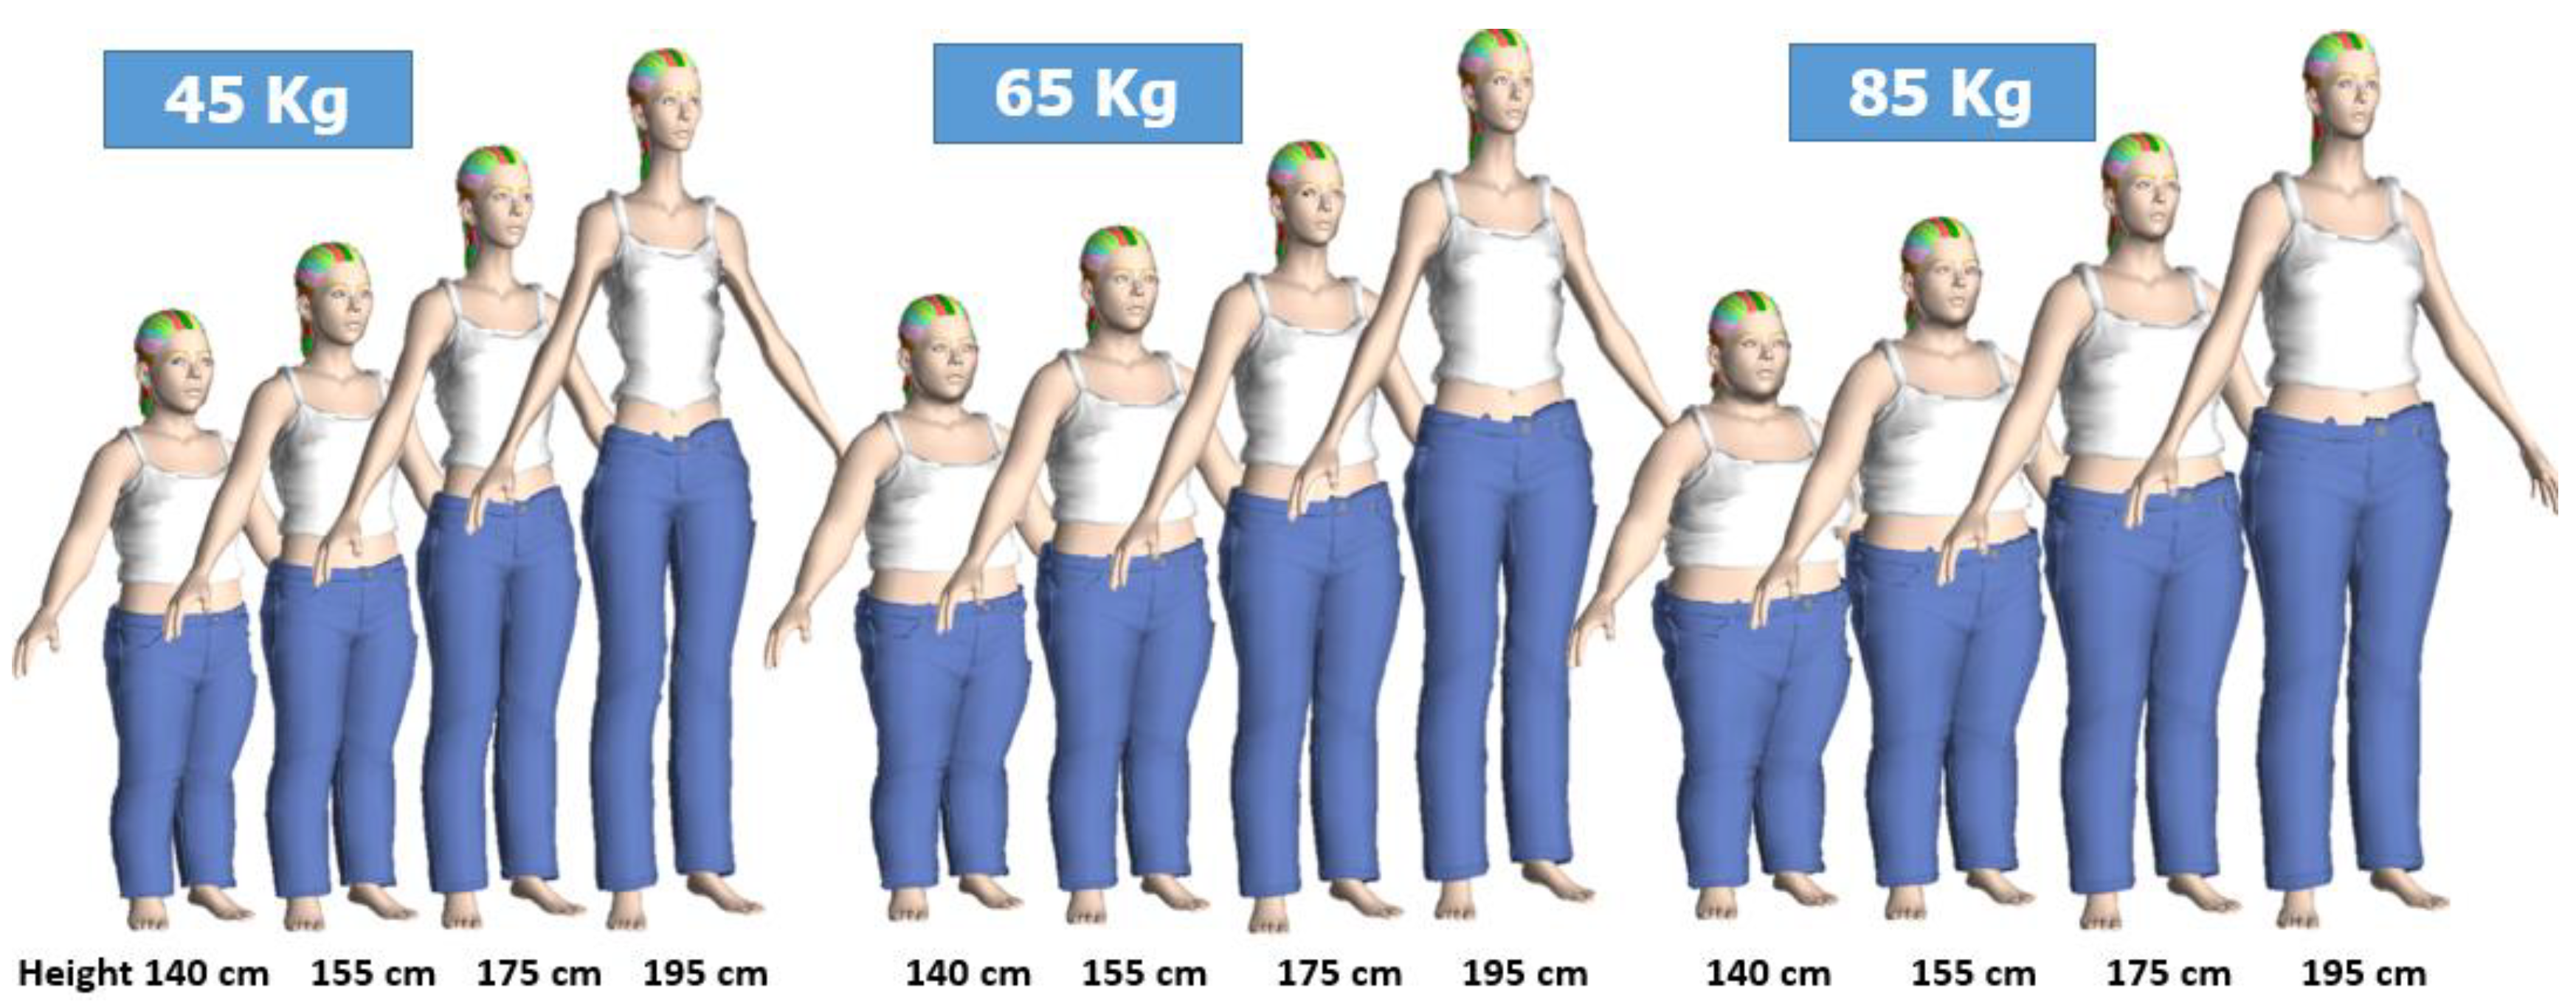 Sensors | Free Full-Text | Simulation of 3D Body Shapes for Pregnant and  Postpartum Women